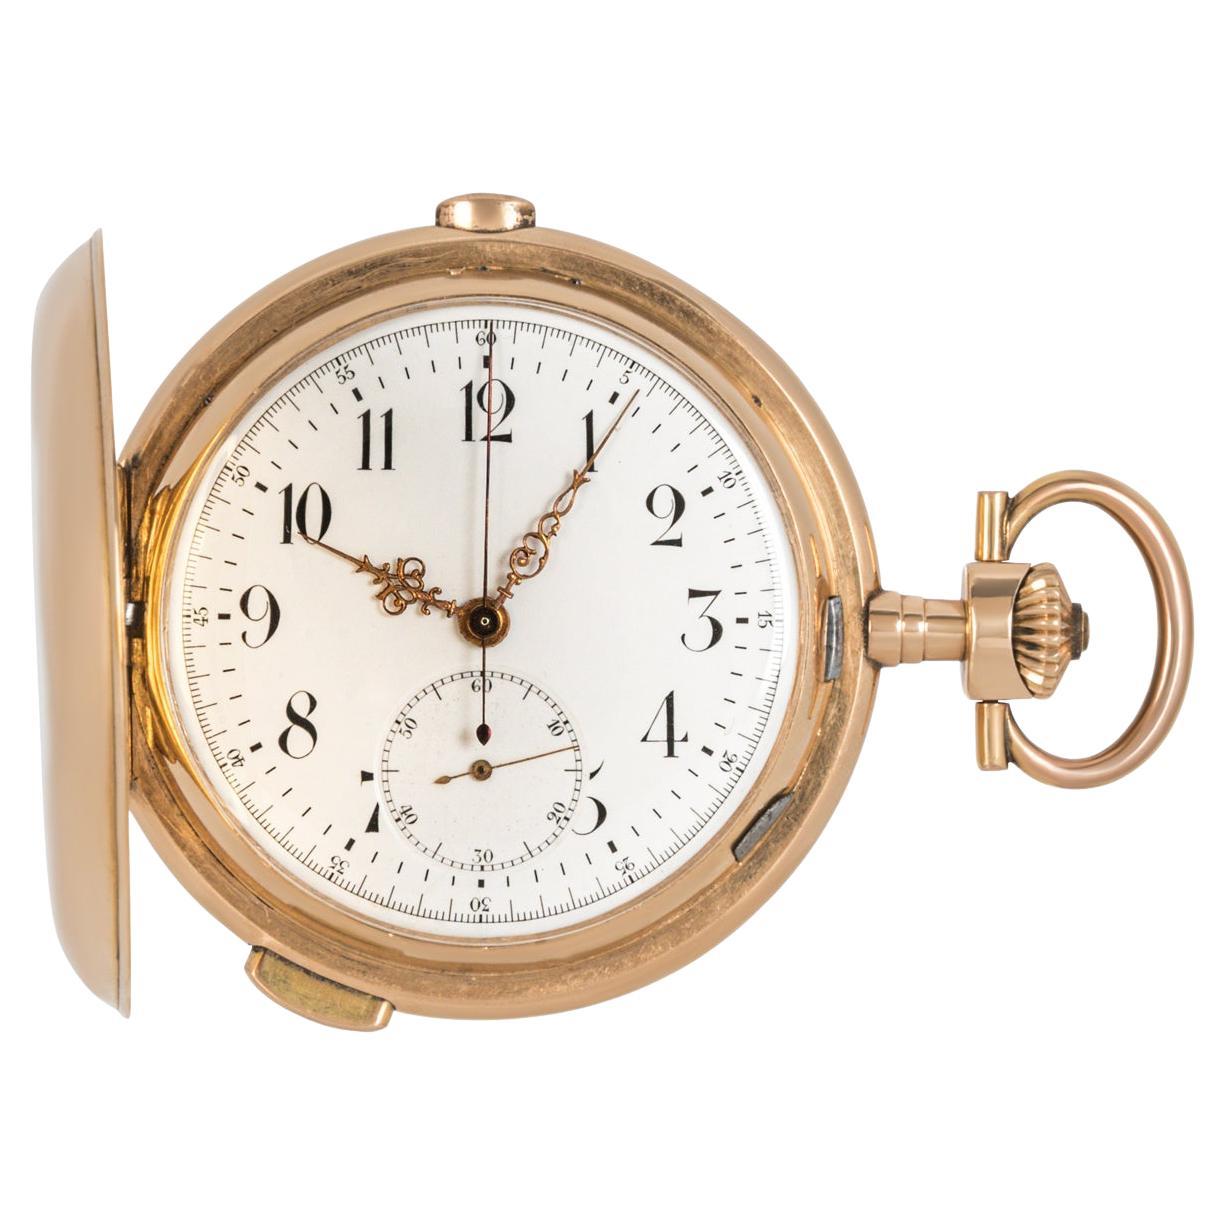 A Rose Gold Quarter Repeater Chronograph Full Hunter Pocket Watch C1896